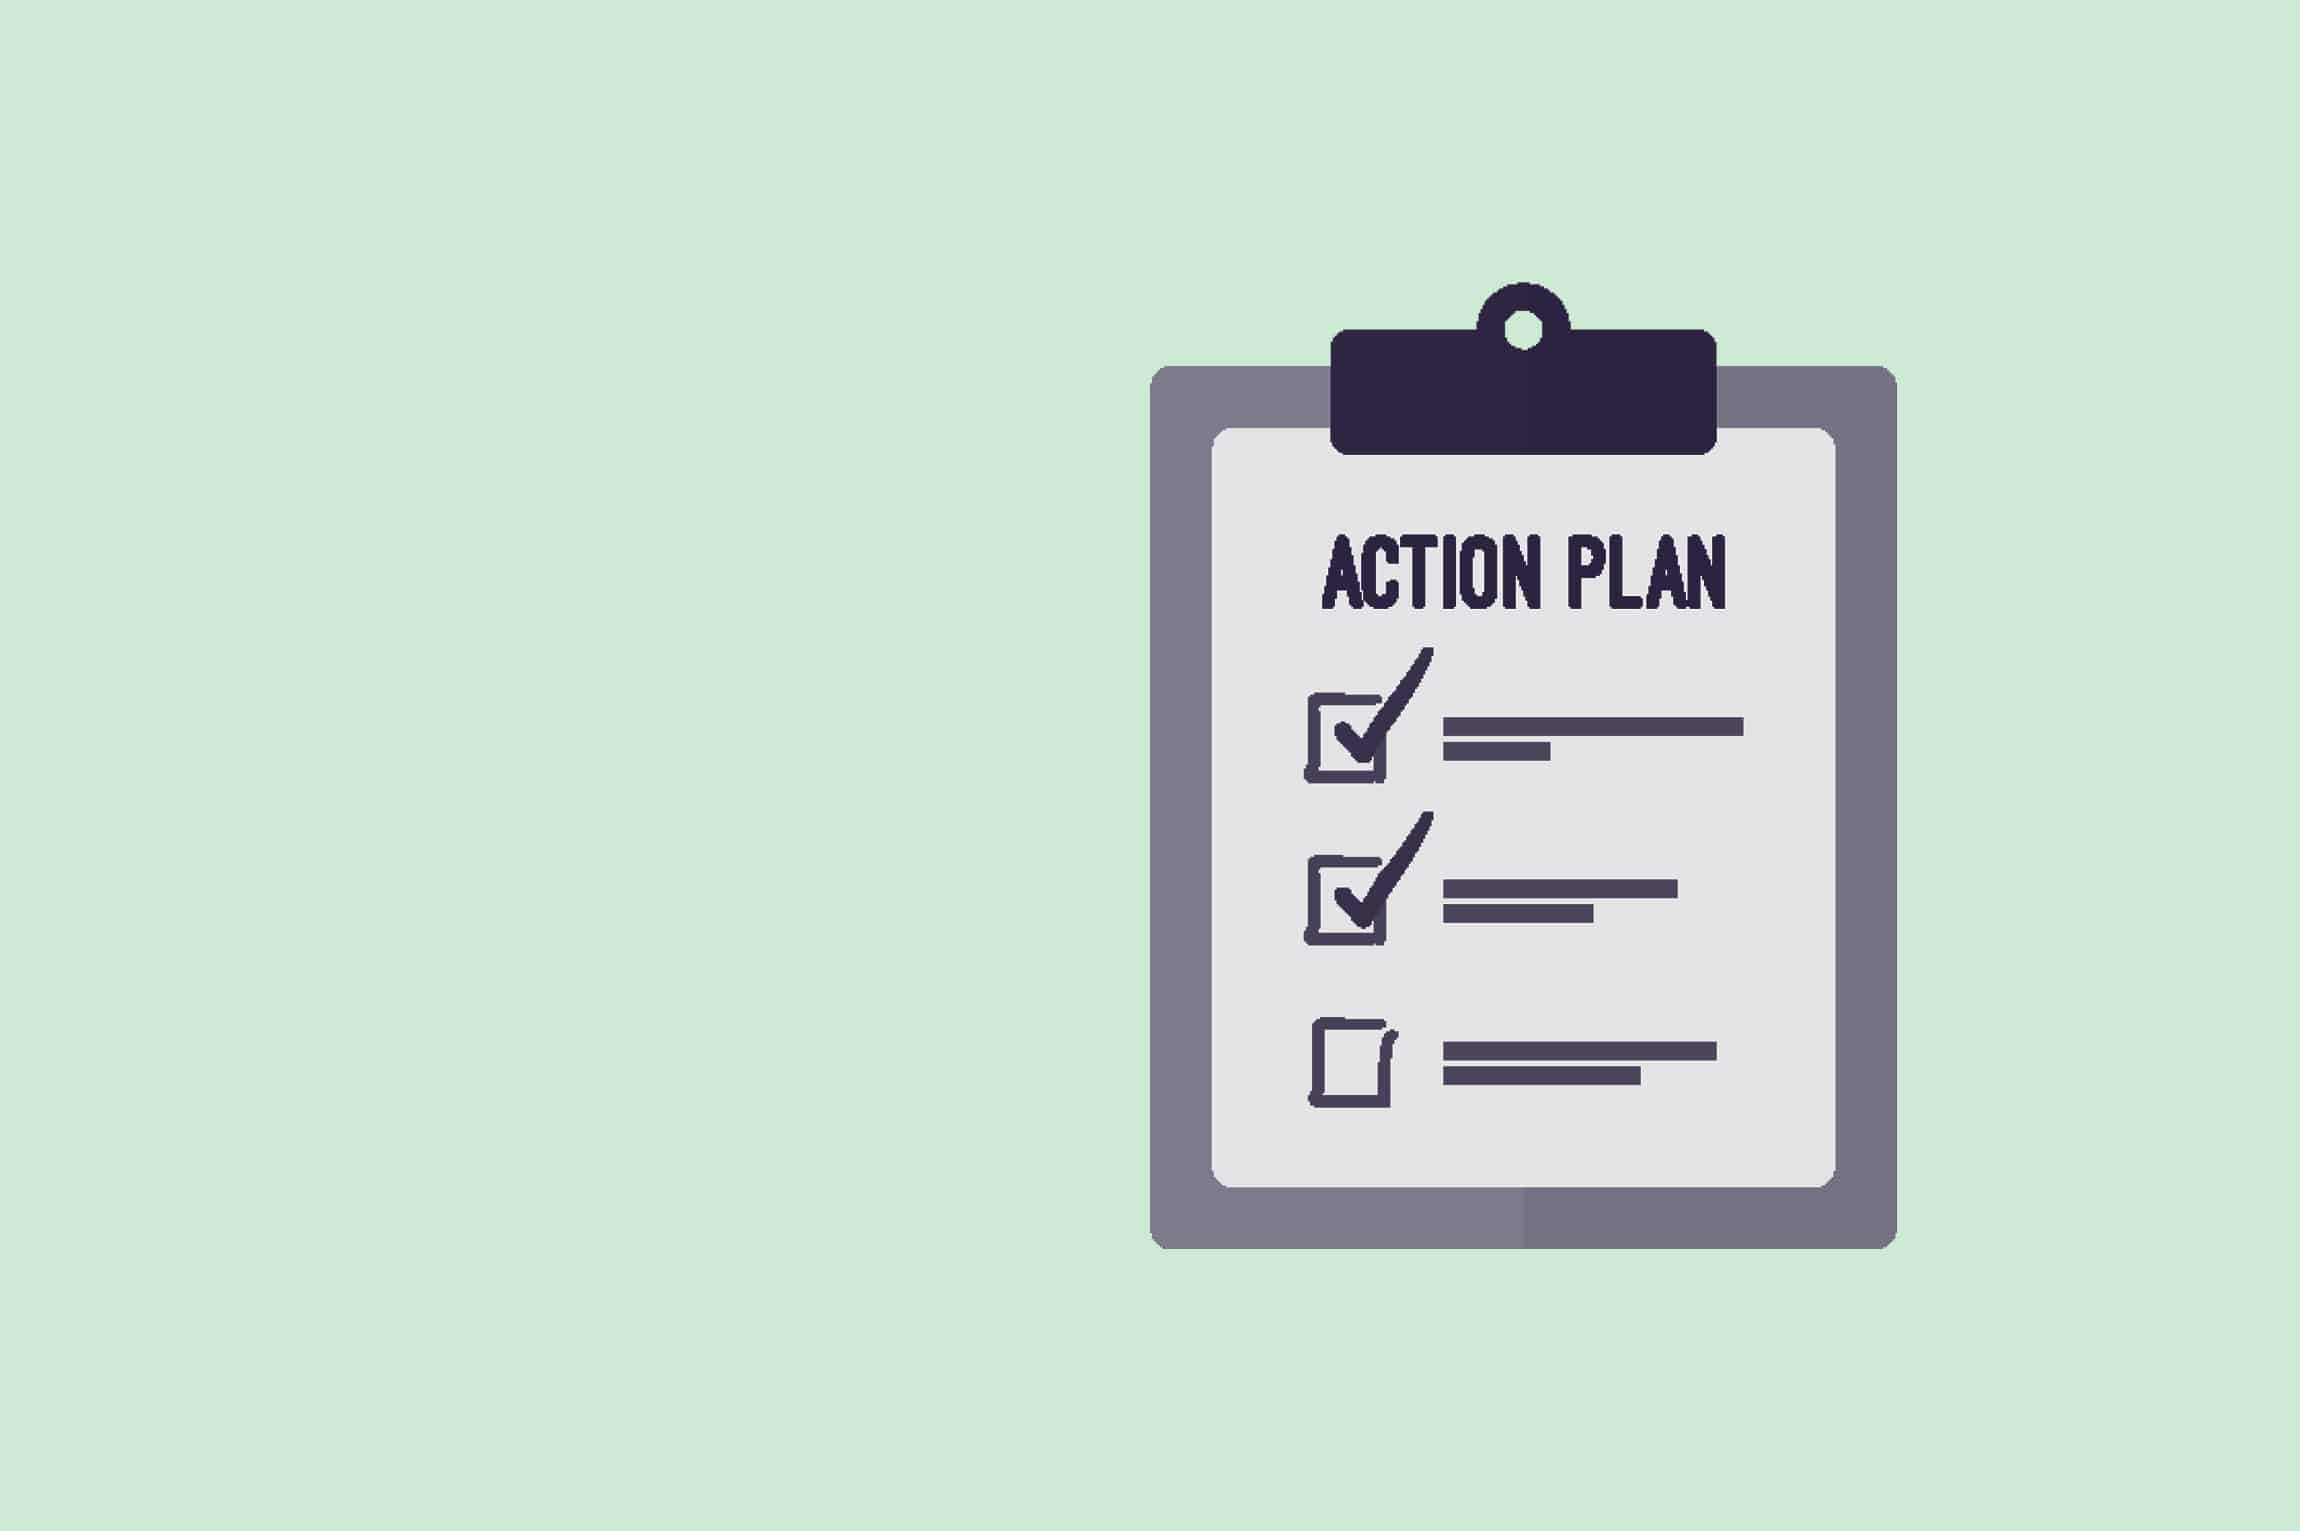 A clipboard with Action Plan written on it